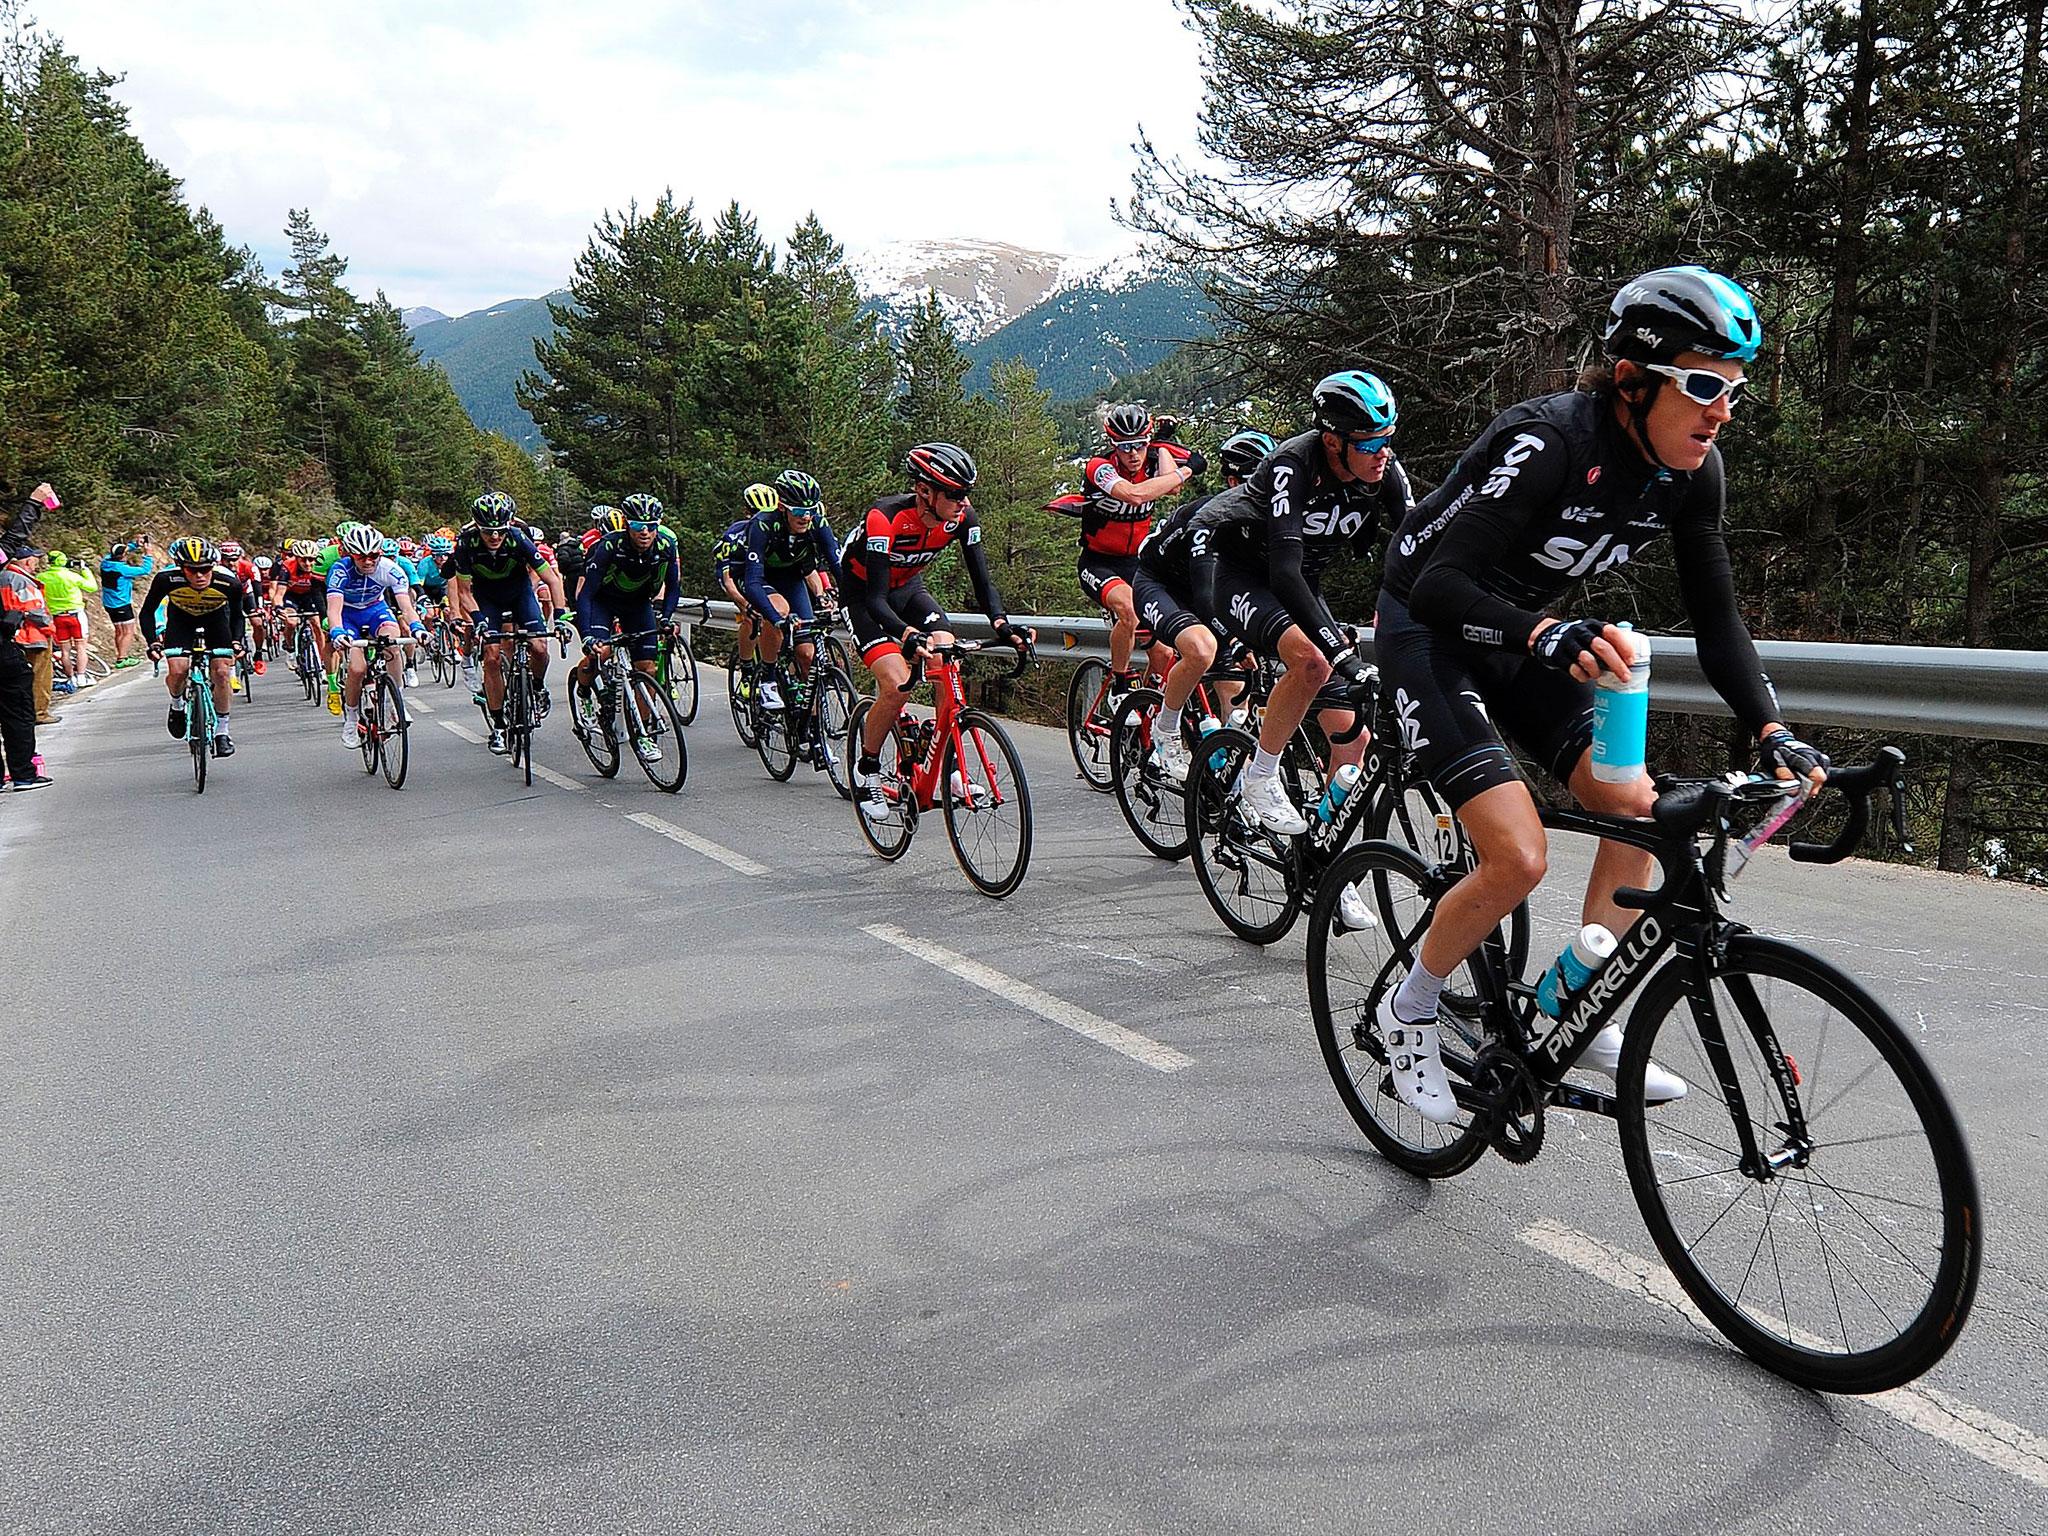 &#13;
Geraint Thomas leads the way for Team Sky &#13;